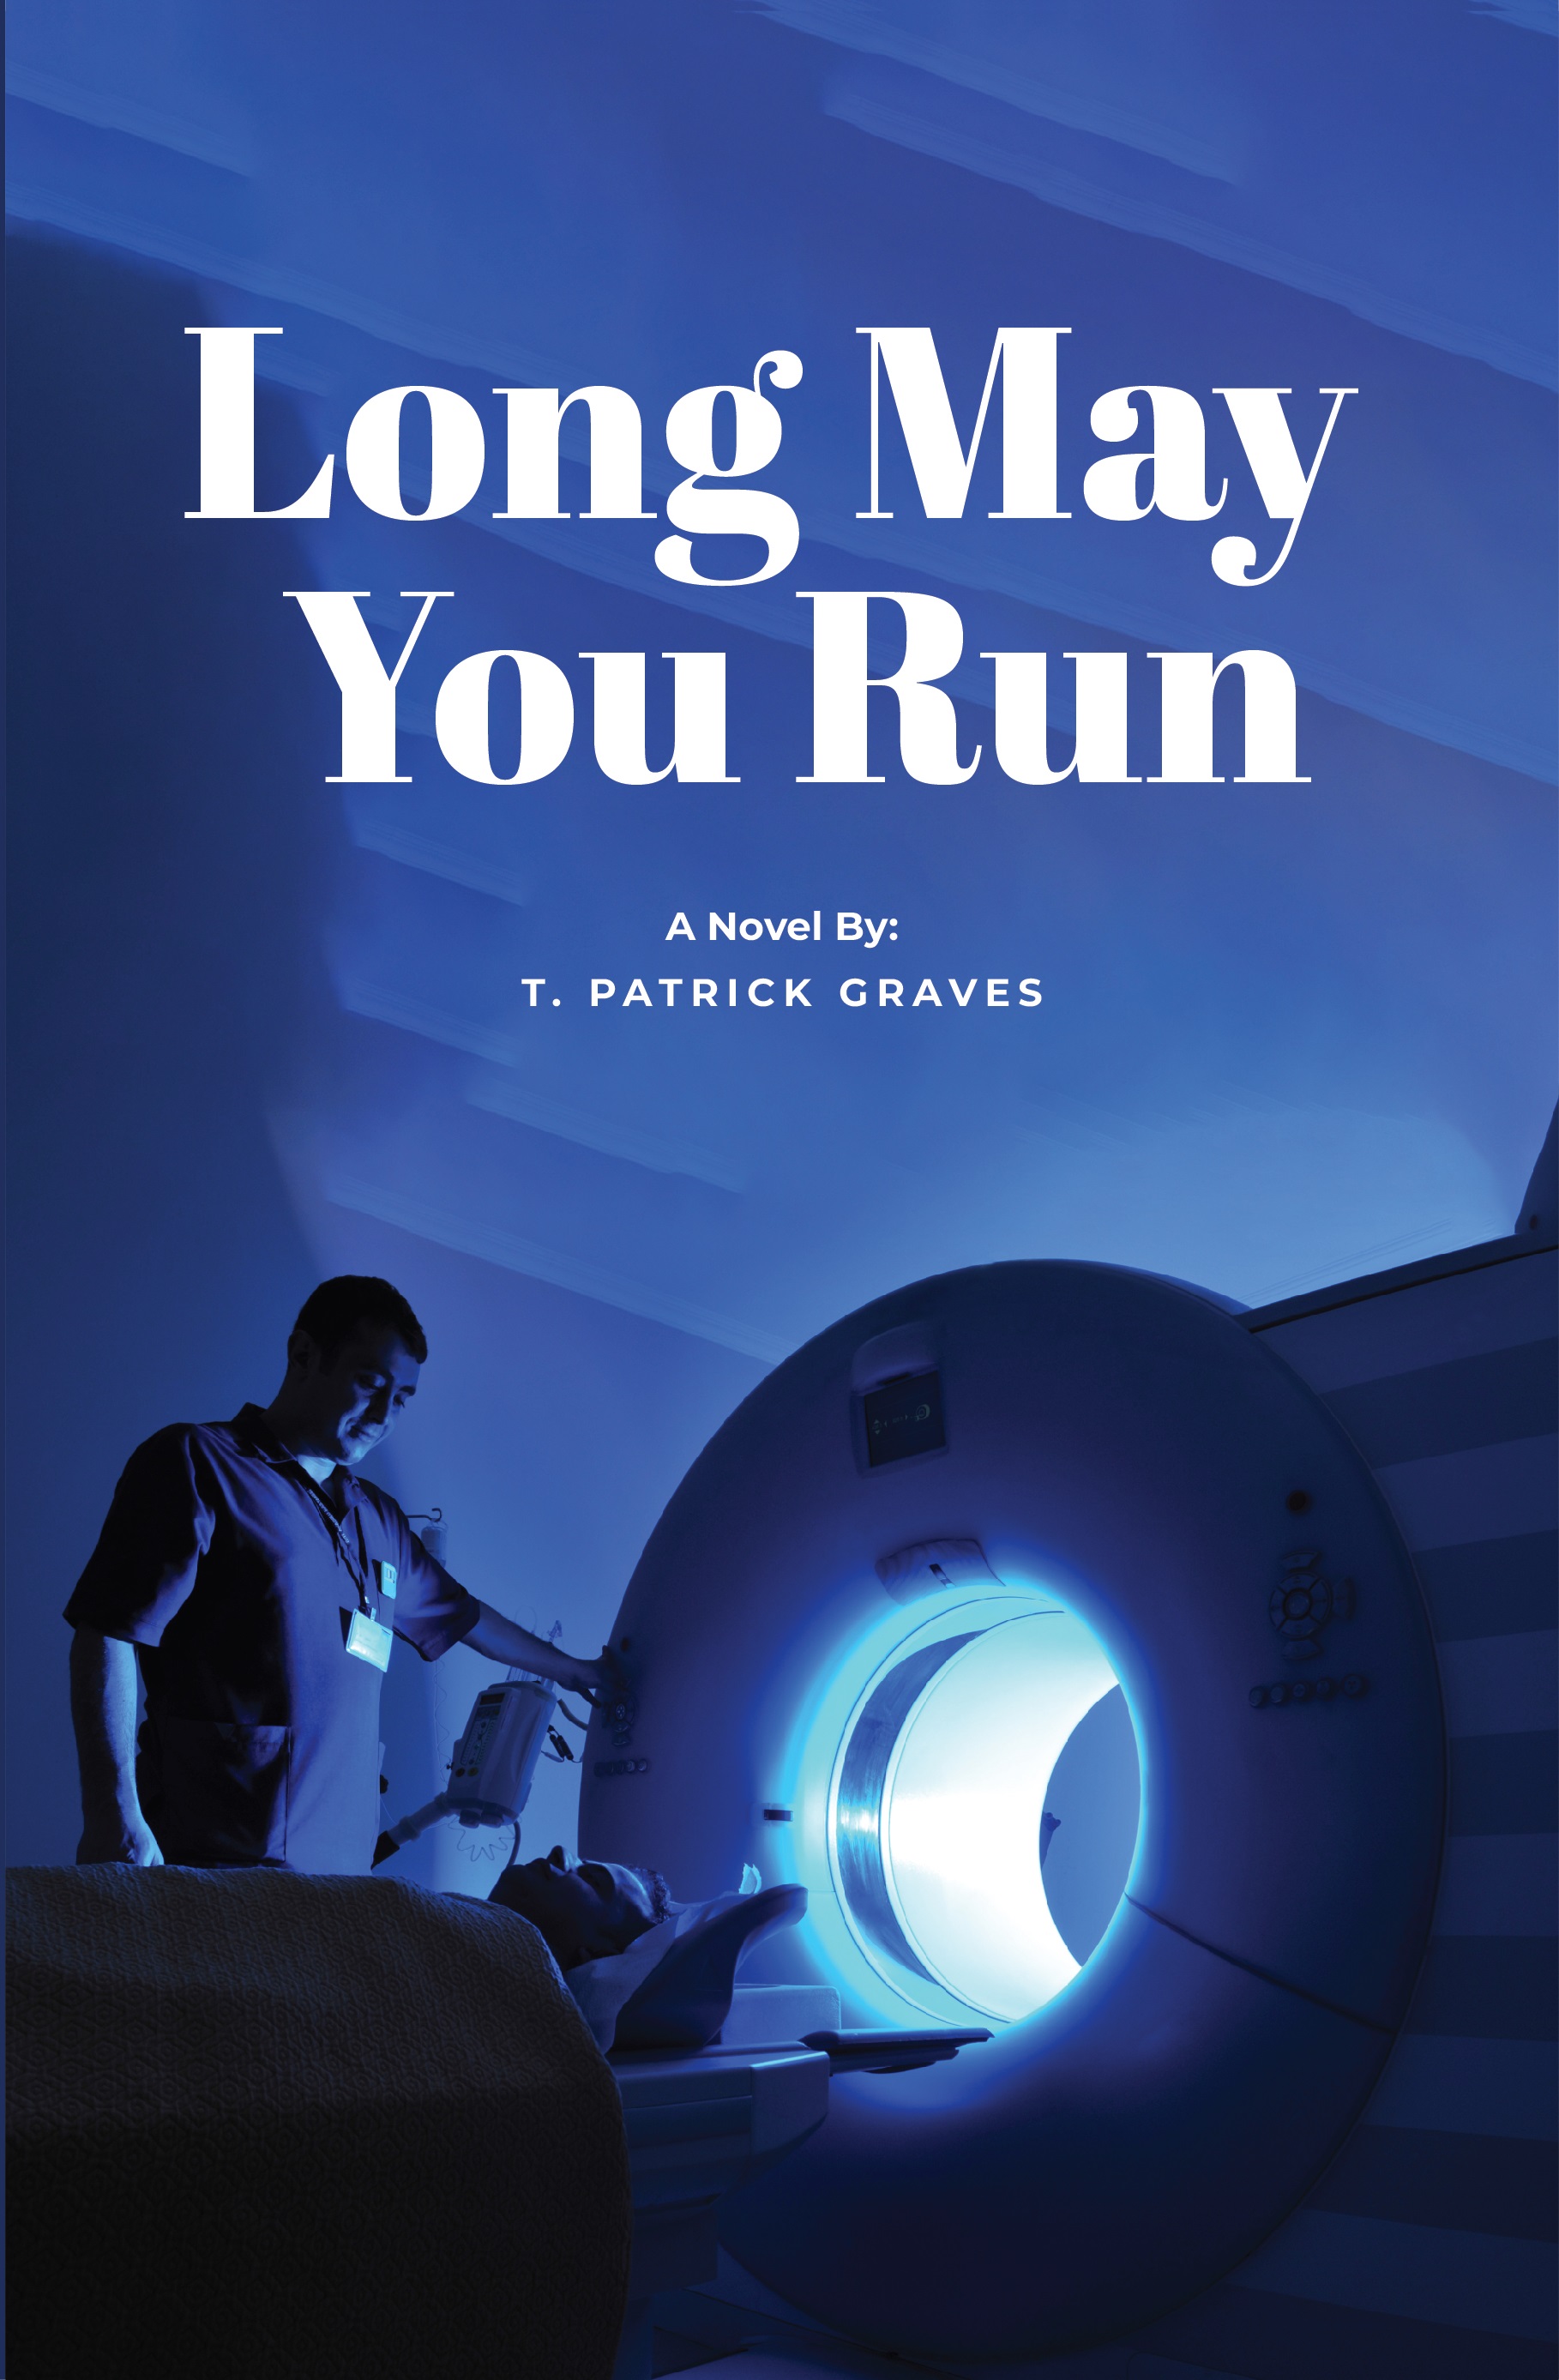 Long May You Run - An Inspiring Tale of Life's Complexities Creates a Buzz in the Literary World